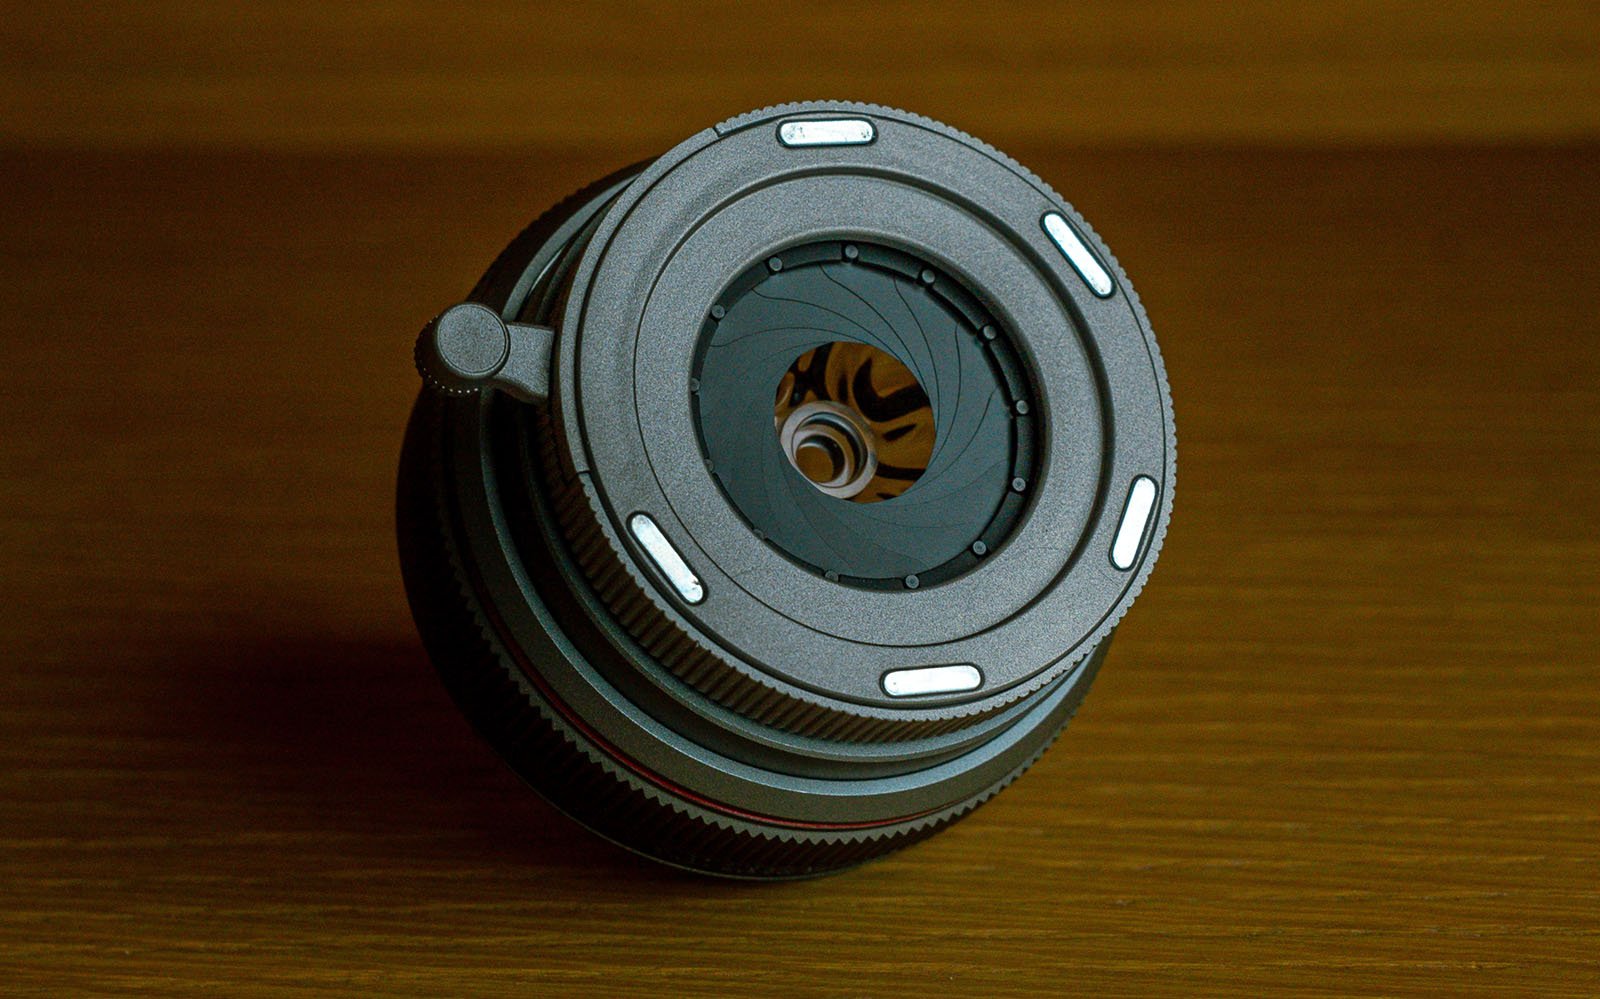 A close-up image of a camera lens placed on a wooden surface. The lens is positioned facing upwards, showcasing the aperture blades and intricate inner components. The background appears warm and softly lit.